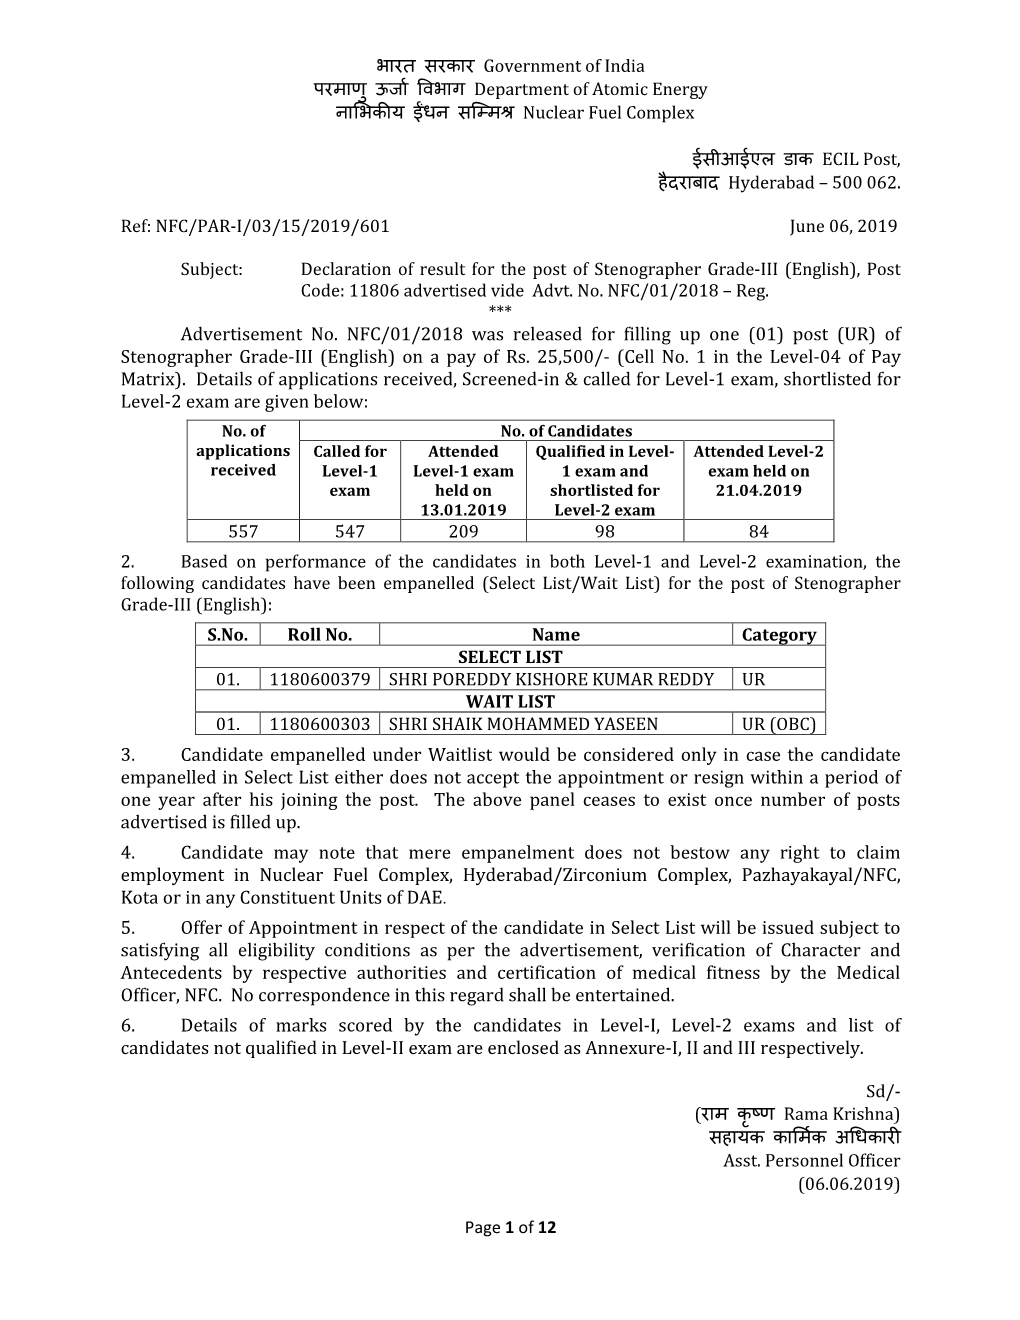 (01) Post (UR) of Stenographer Grade-III (English) on a Pay of Rs